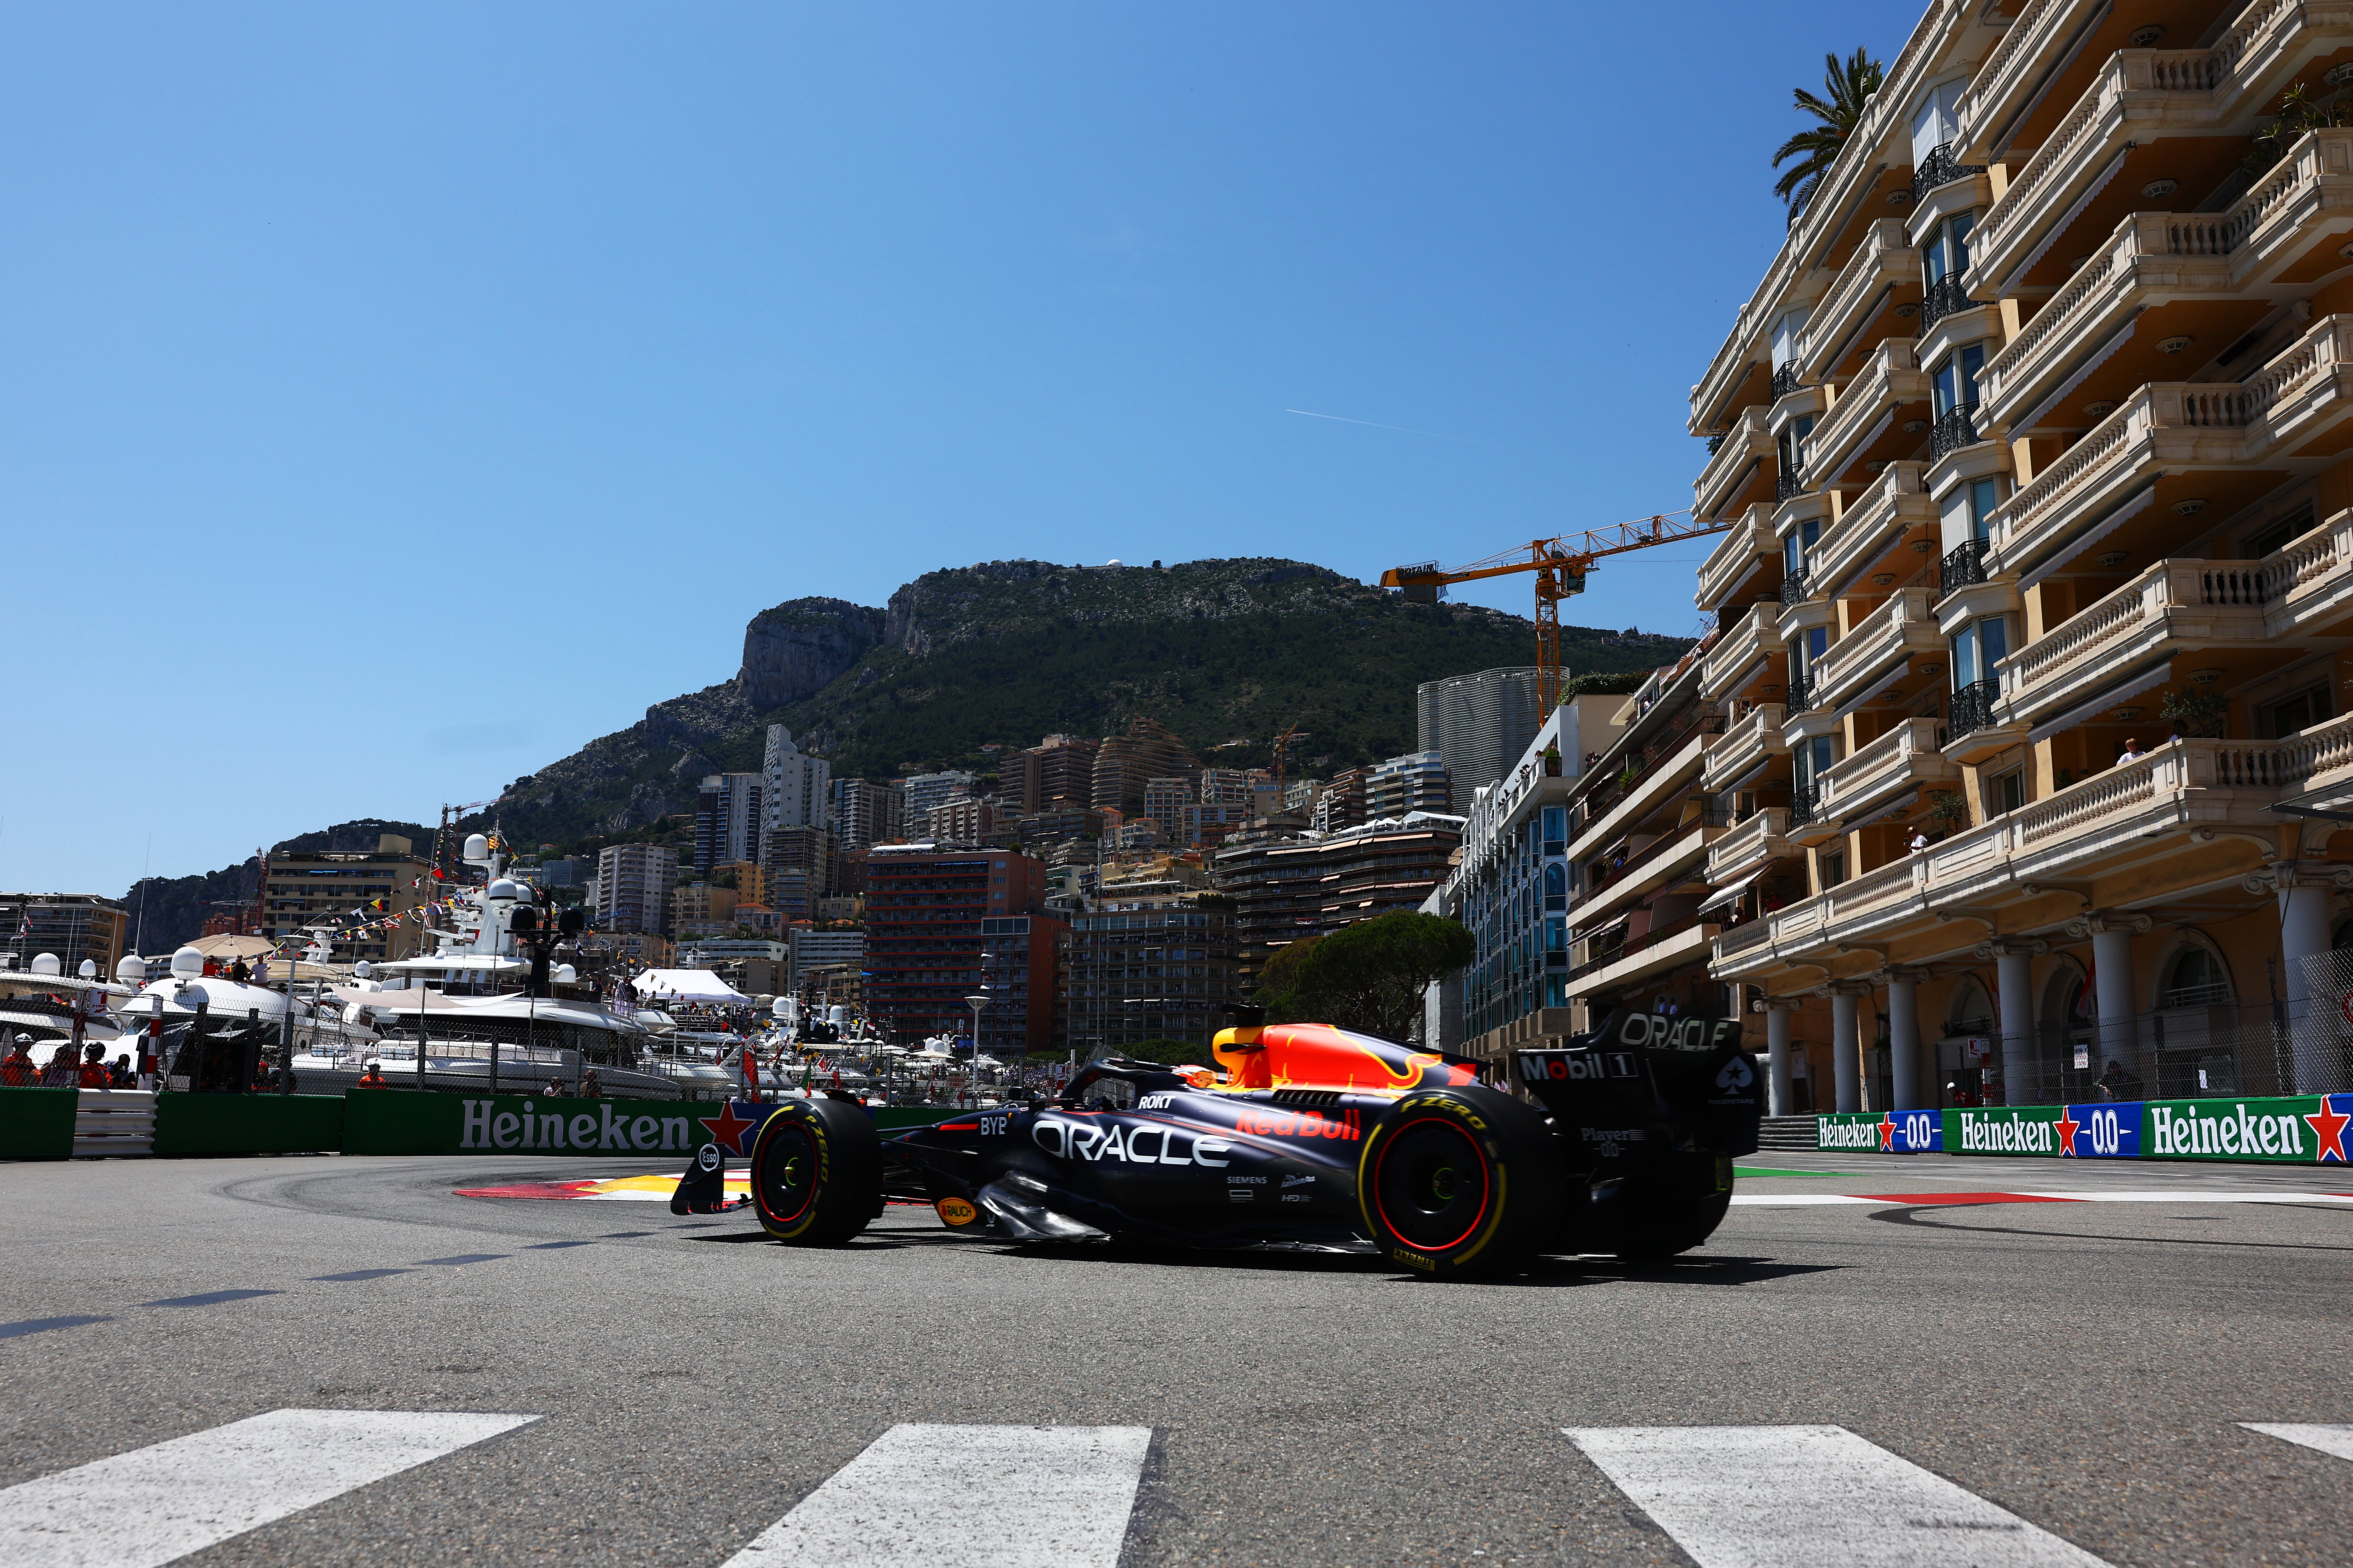 F1 FP1 results as Max Verstappen struggles and Carlos Sainz goes fastest in Monaco opening practice The Independent